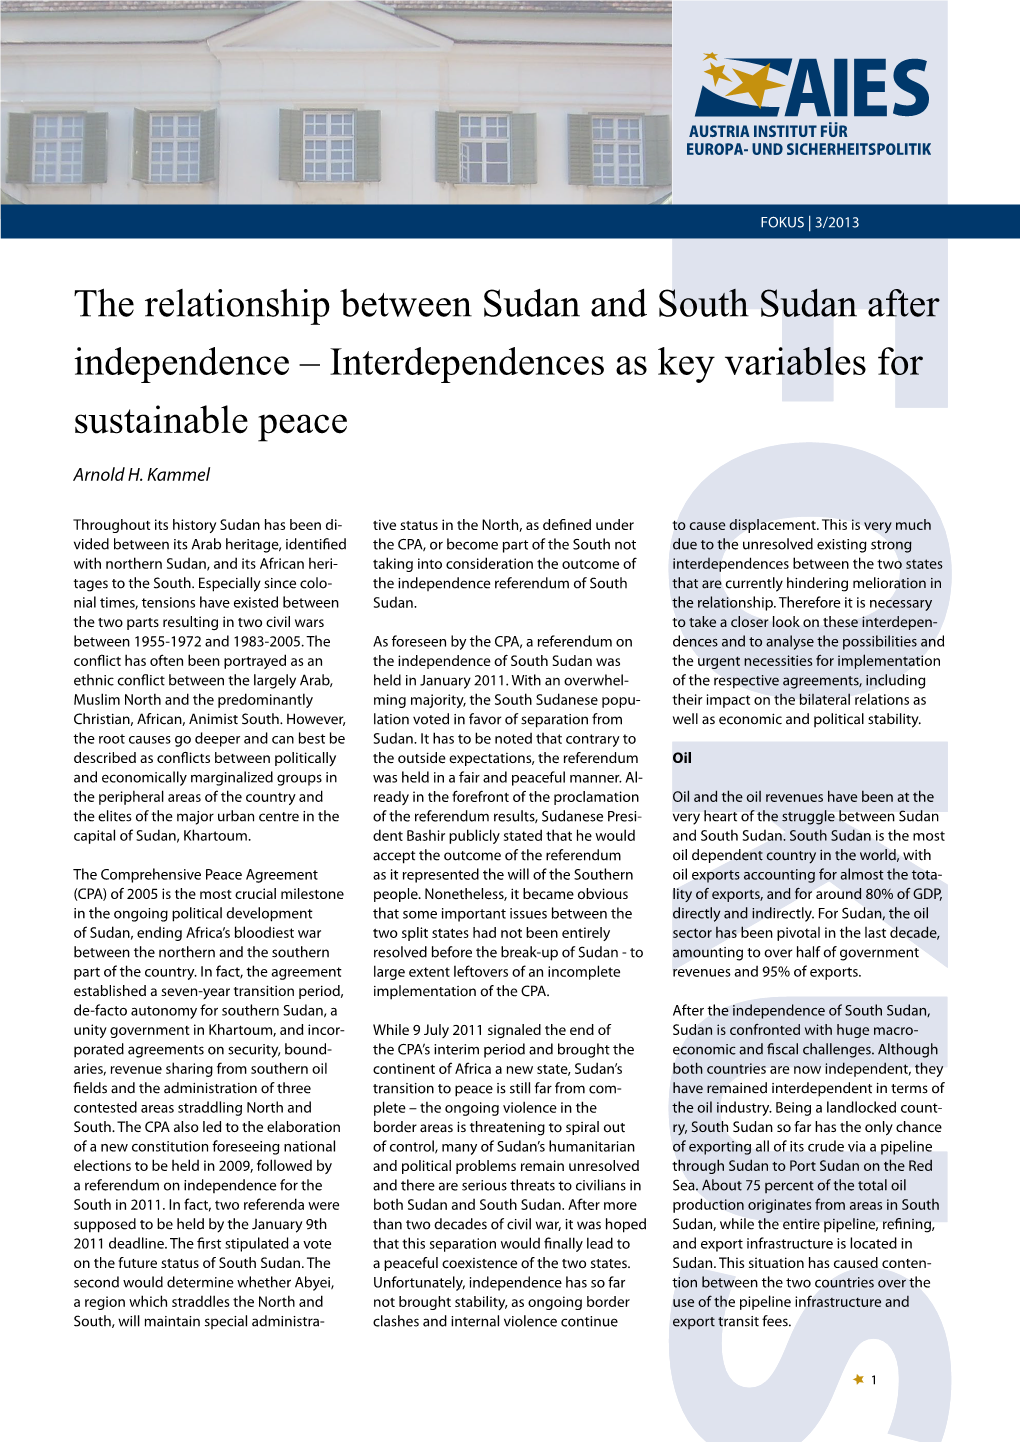 The Relationship Between Sudan and South Sudan After Independence – Interdependences As Key Variables for Sustainable Peace